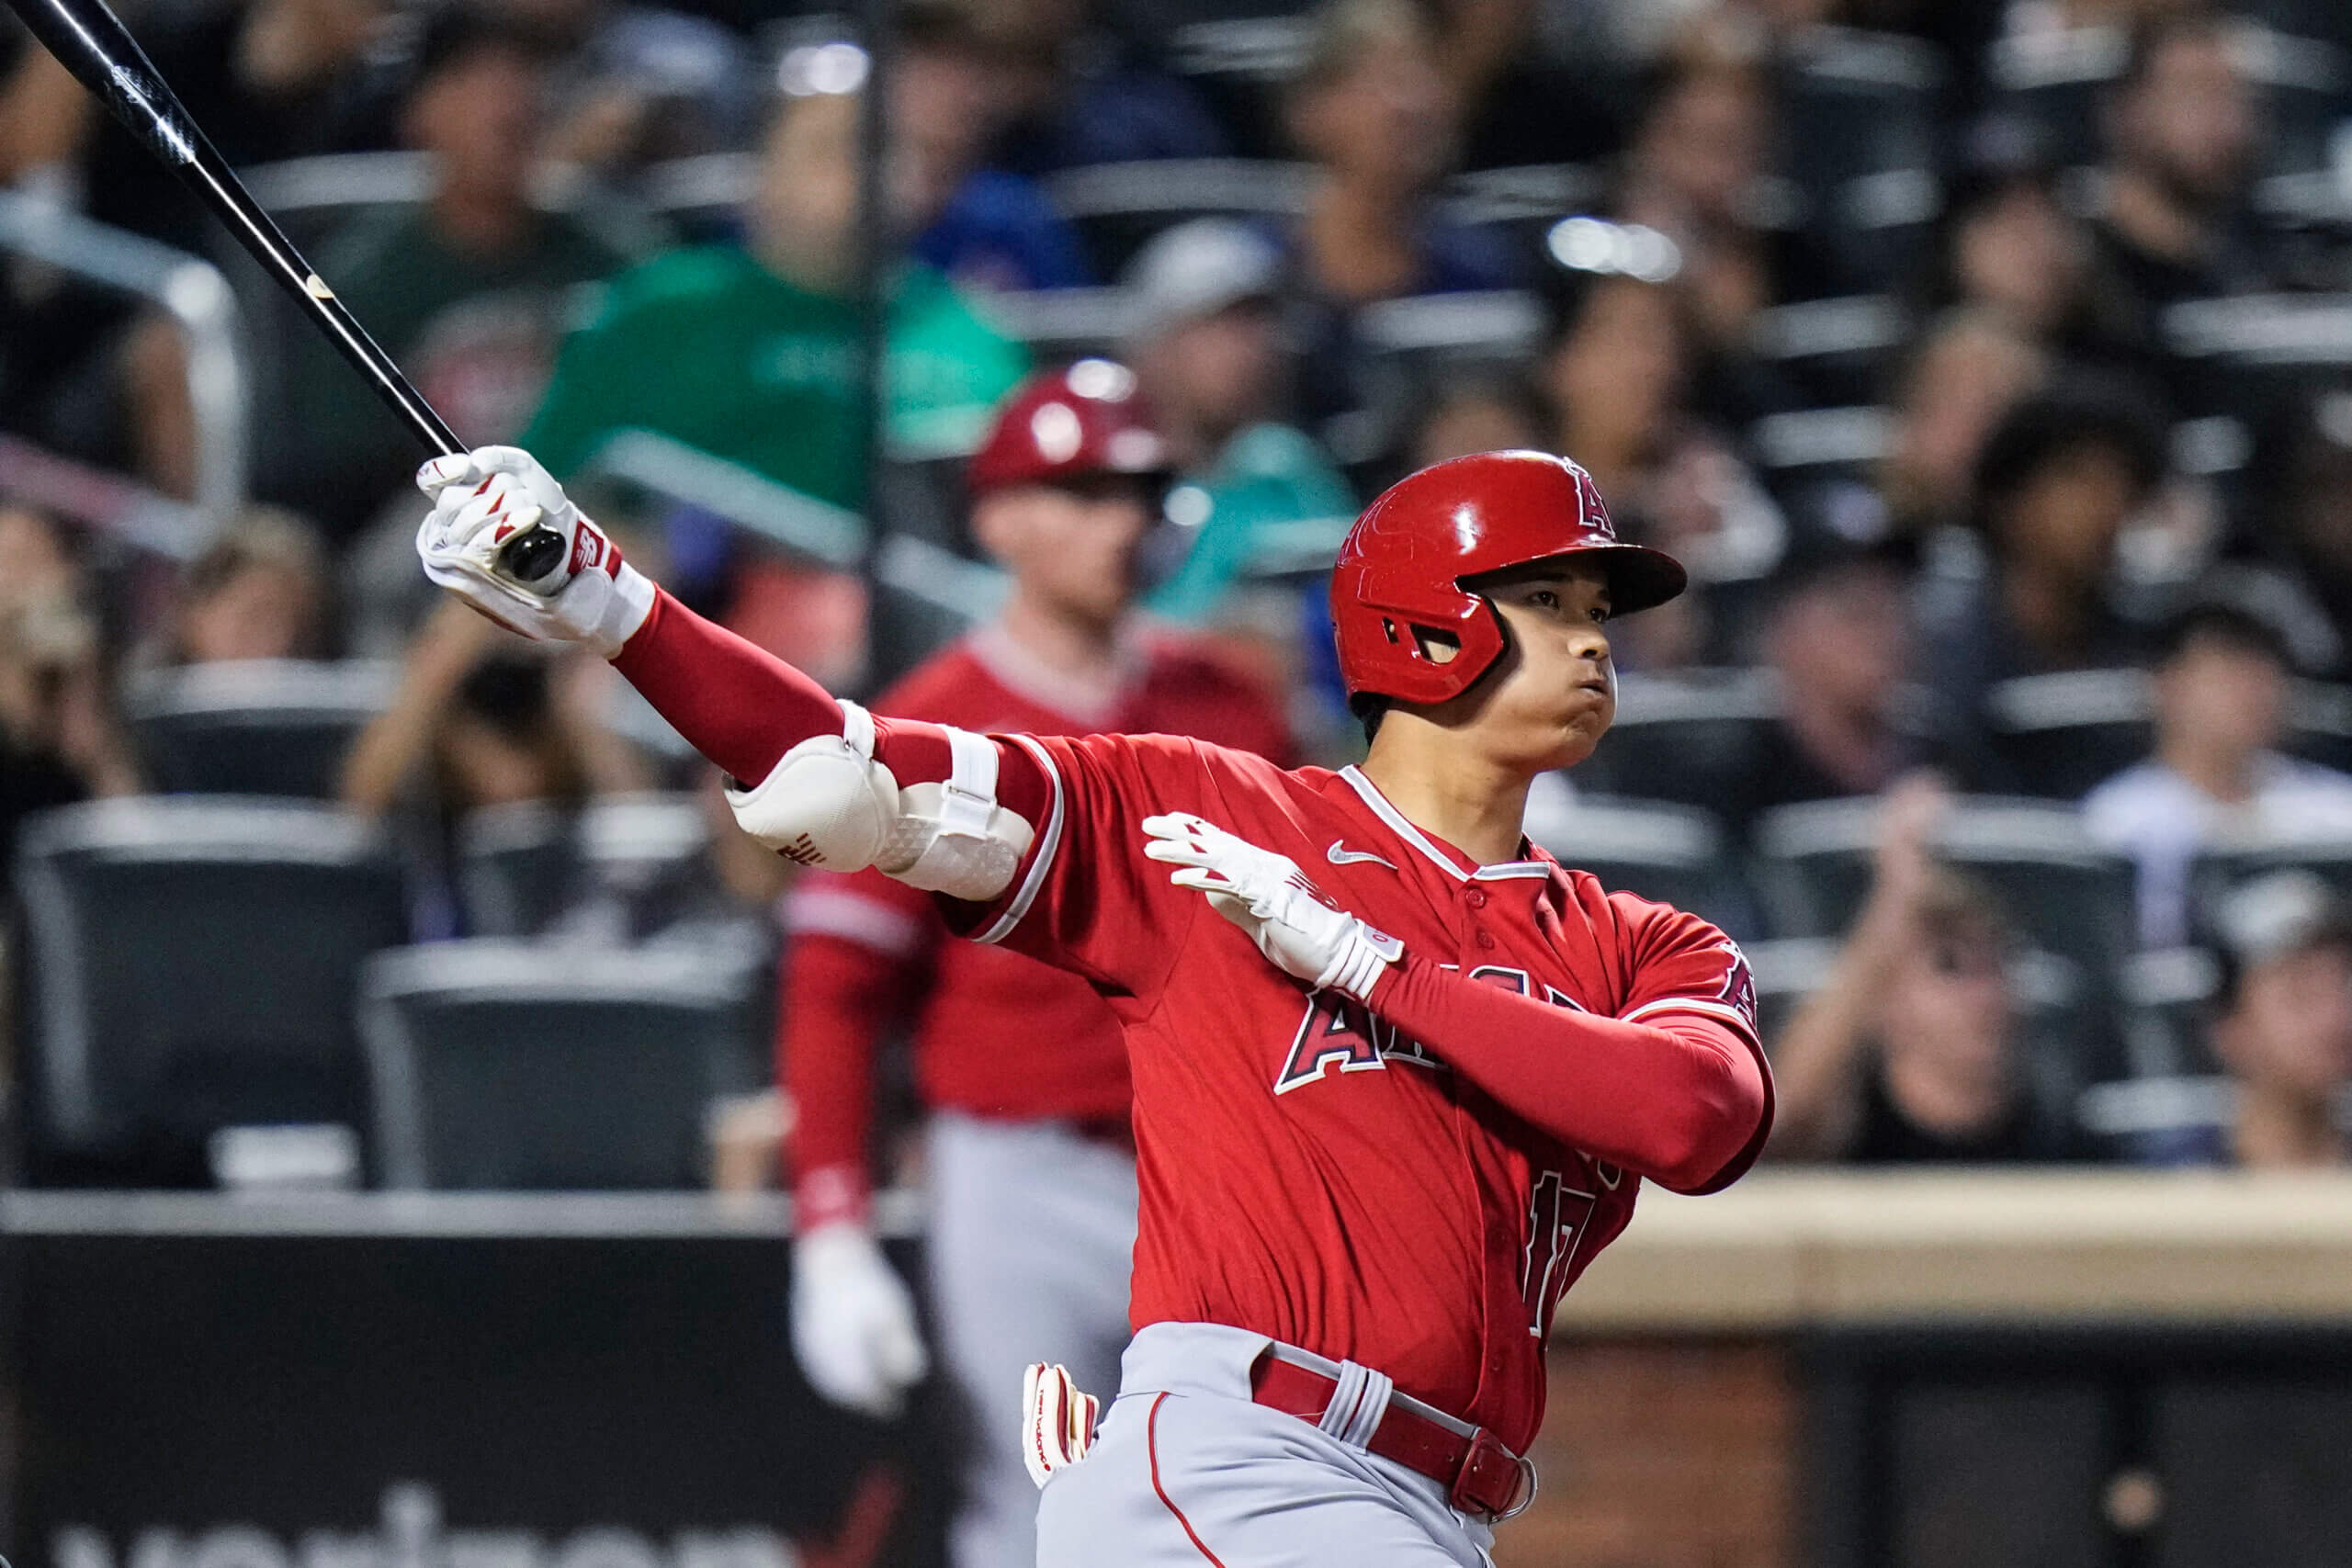 Mets free agency: The Mets are in pursuit of Shohei Ohtani - Amazin' Avenue